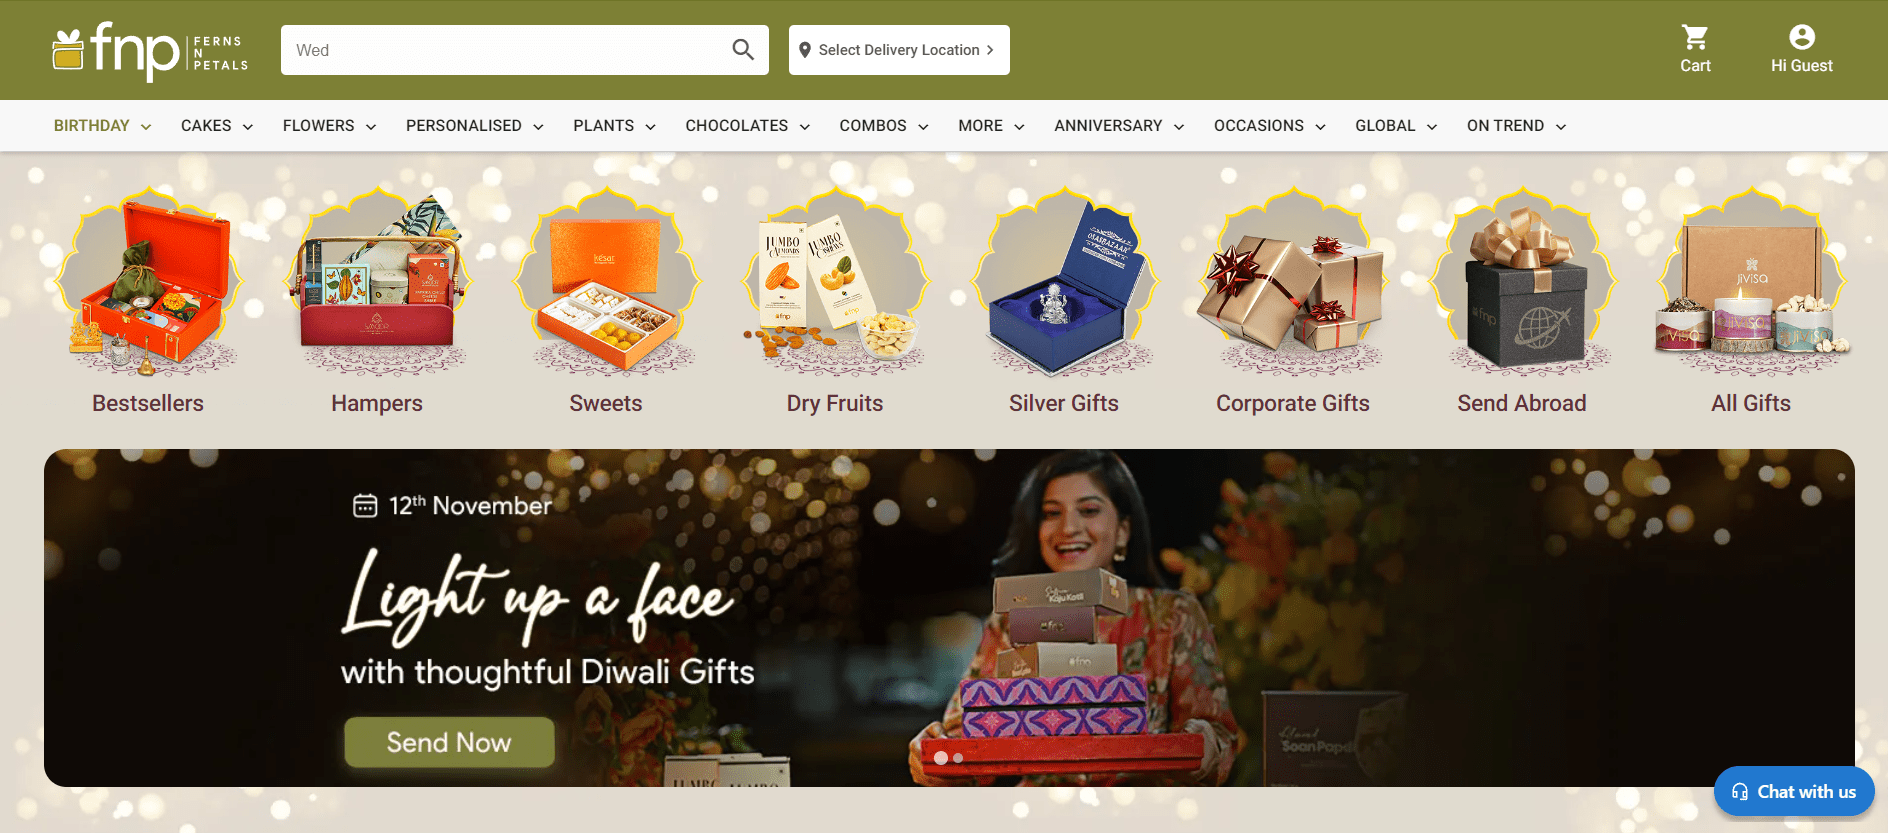 9 Best Corporate Gifting Brands For Diwali Festival